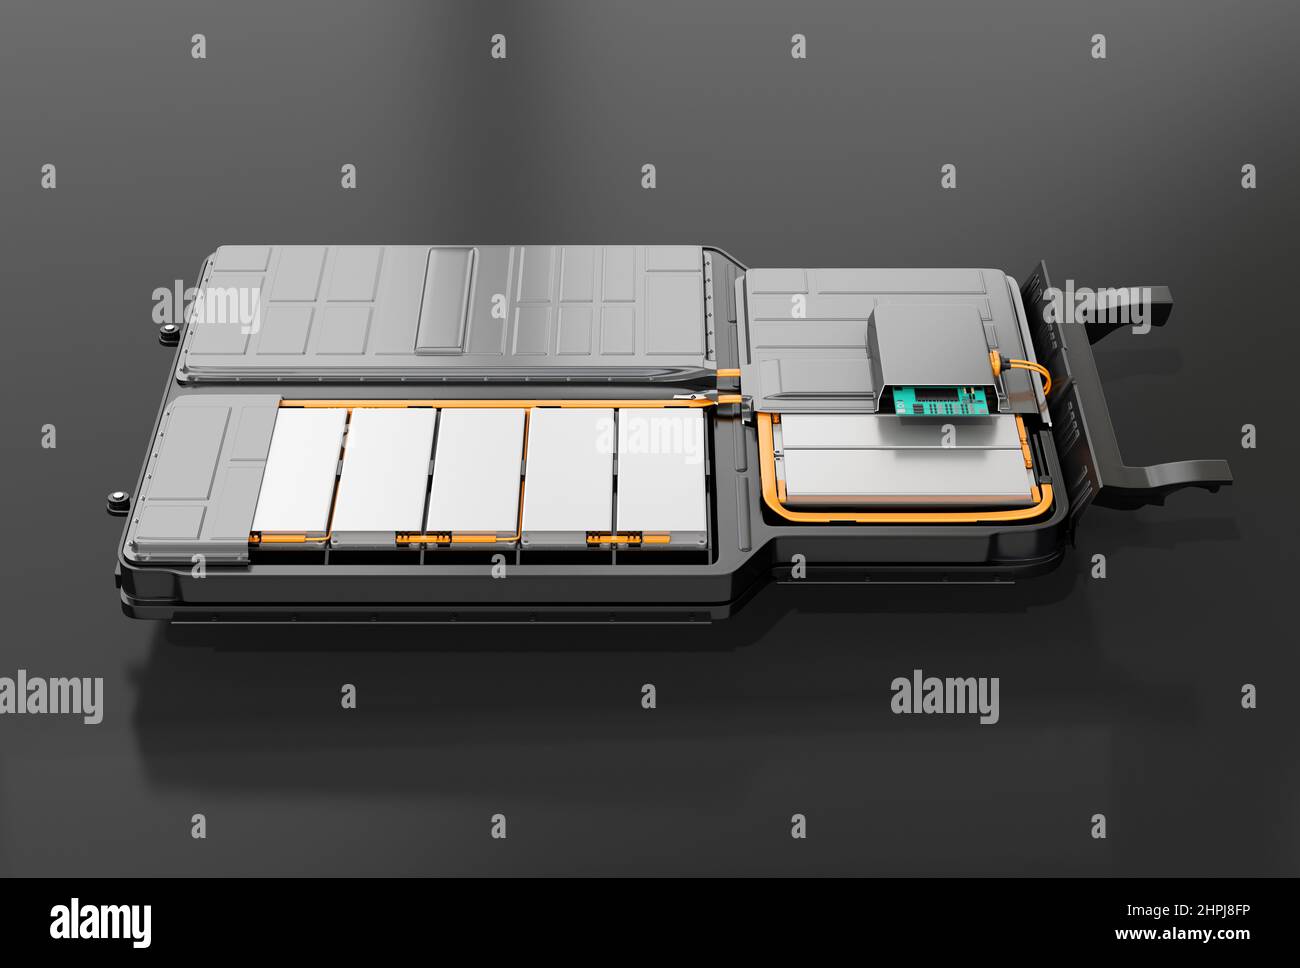 Cutaway view of electric vehicle battery pack on black background. 3D rendering image. Stock Photo